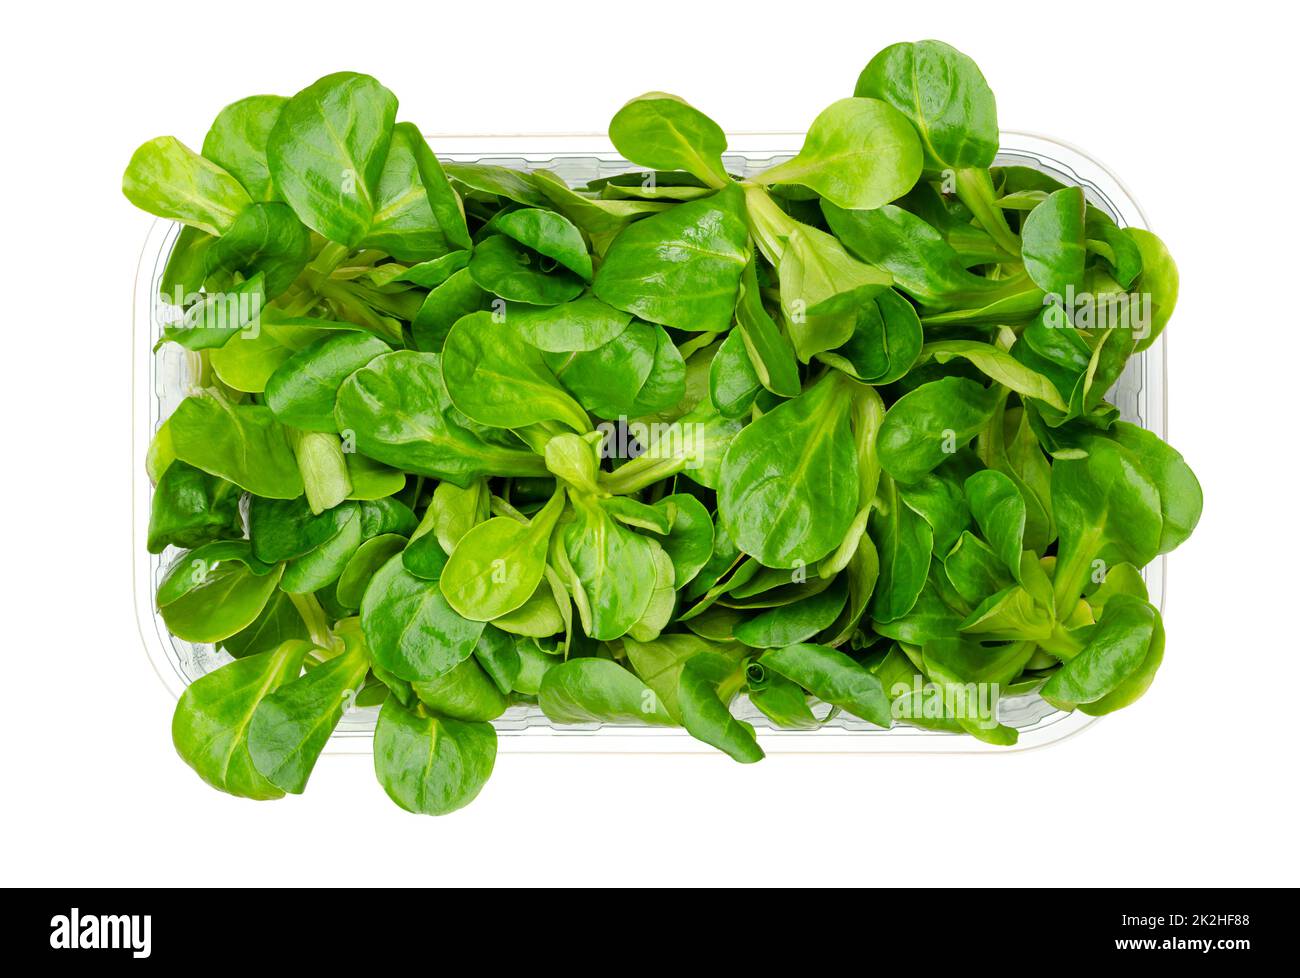 Lambs lettuce, fresh picked cornsalad, in plastic container from above Stock Photo